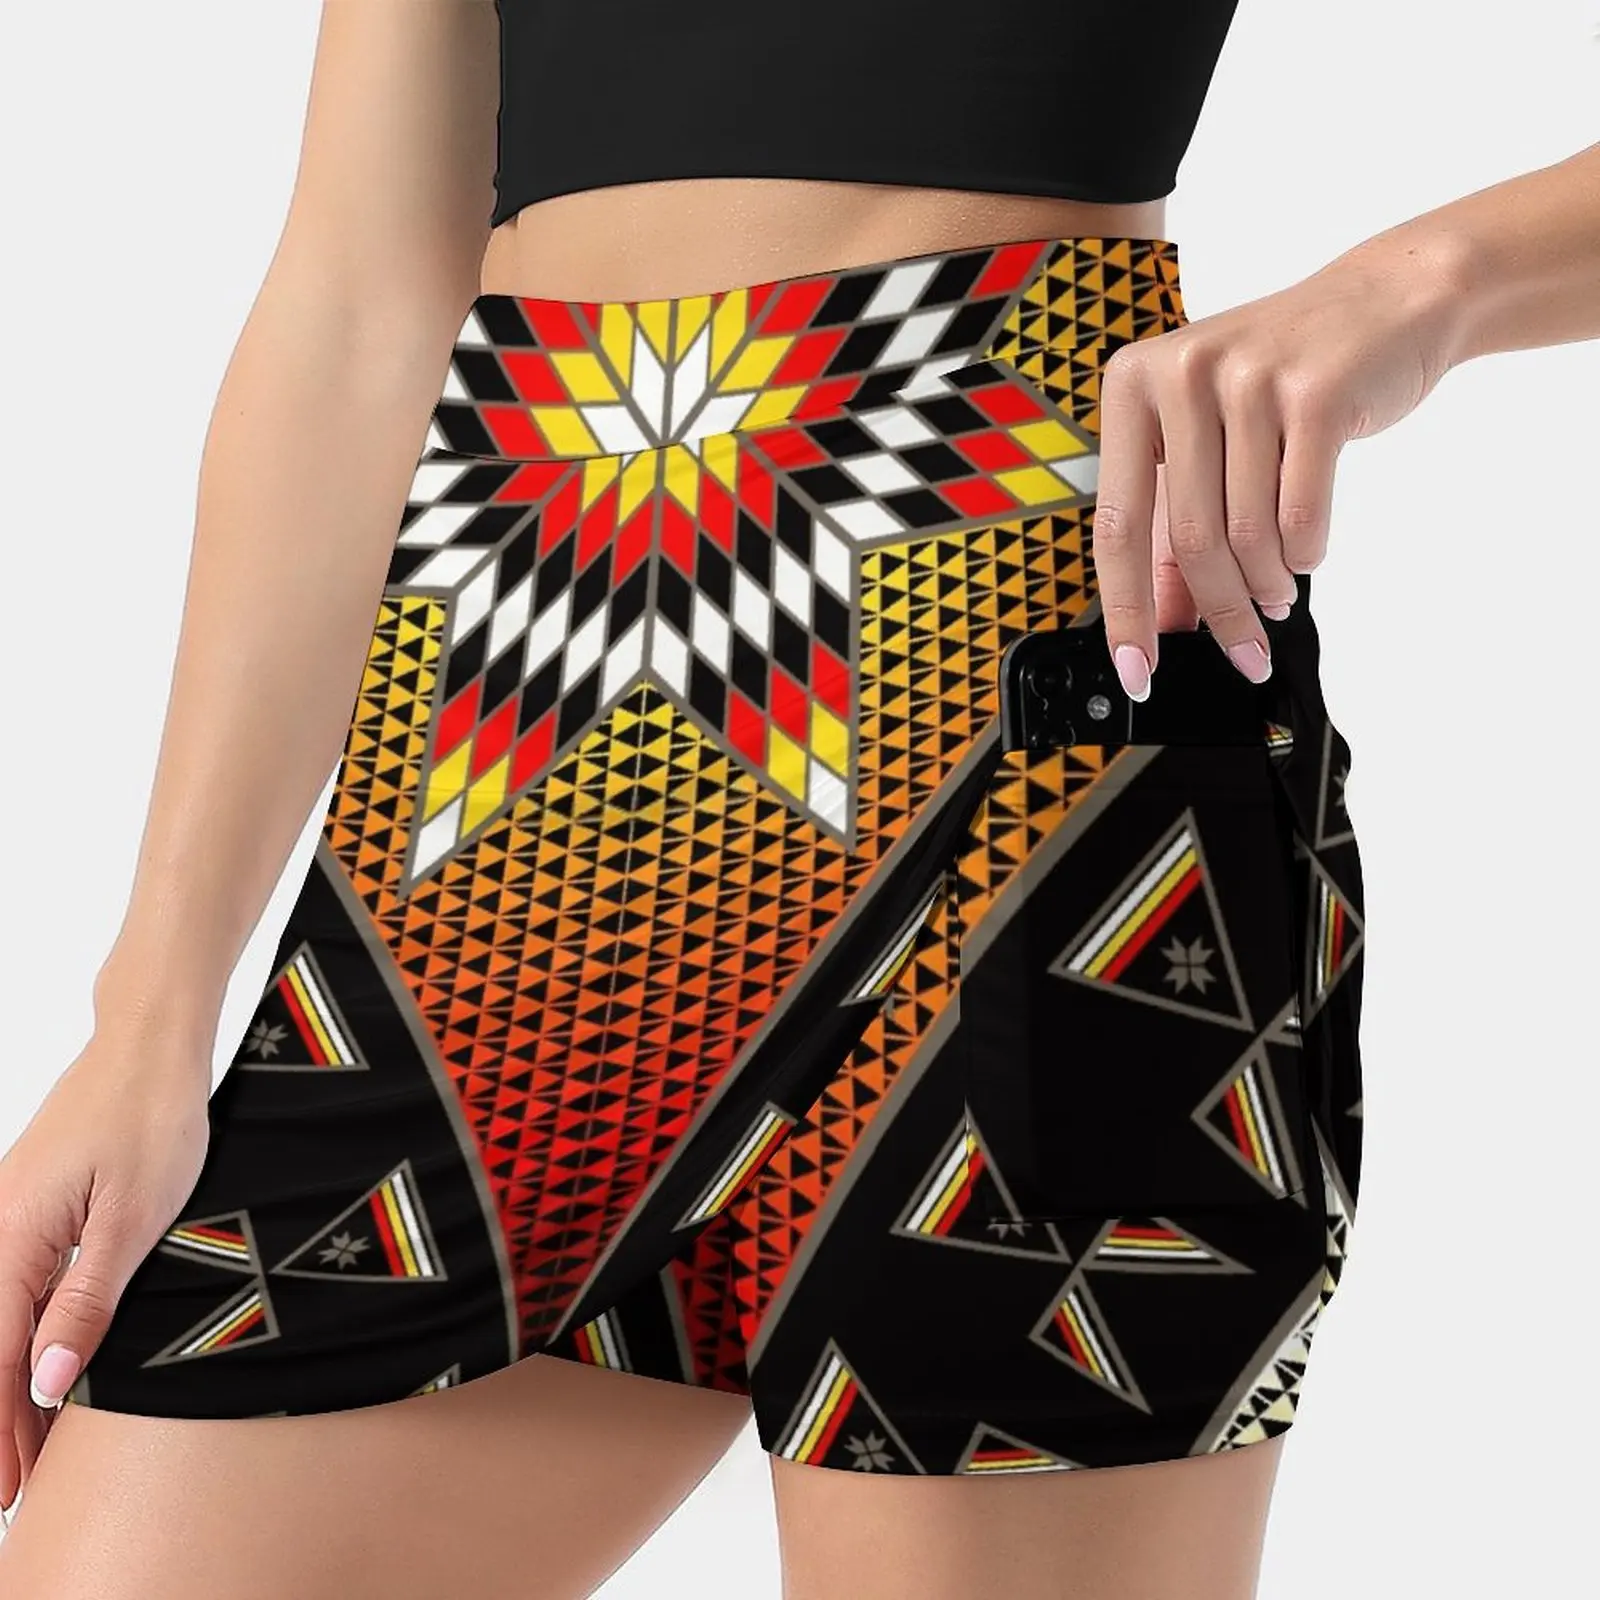 

Morning Star With Tipi'S ( Bryw ) Women's skirt Aesthetic skirts New Fashion Short Skirts Melvin War Eagle Culture Native Art